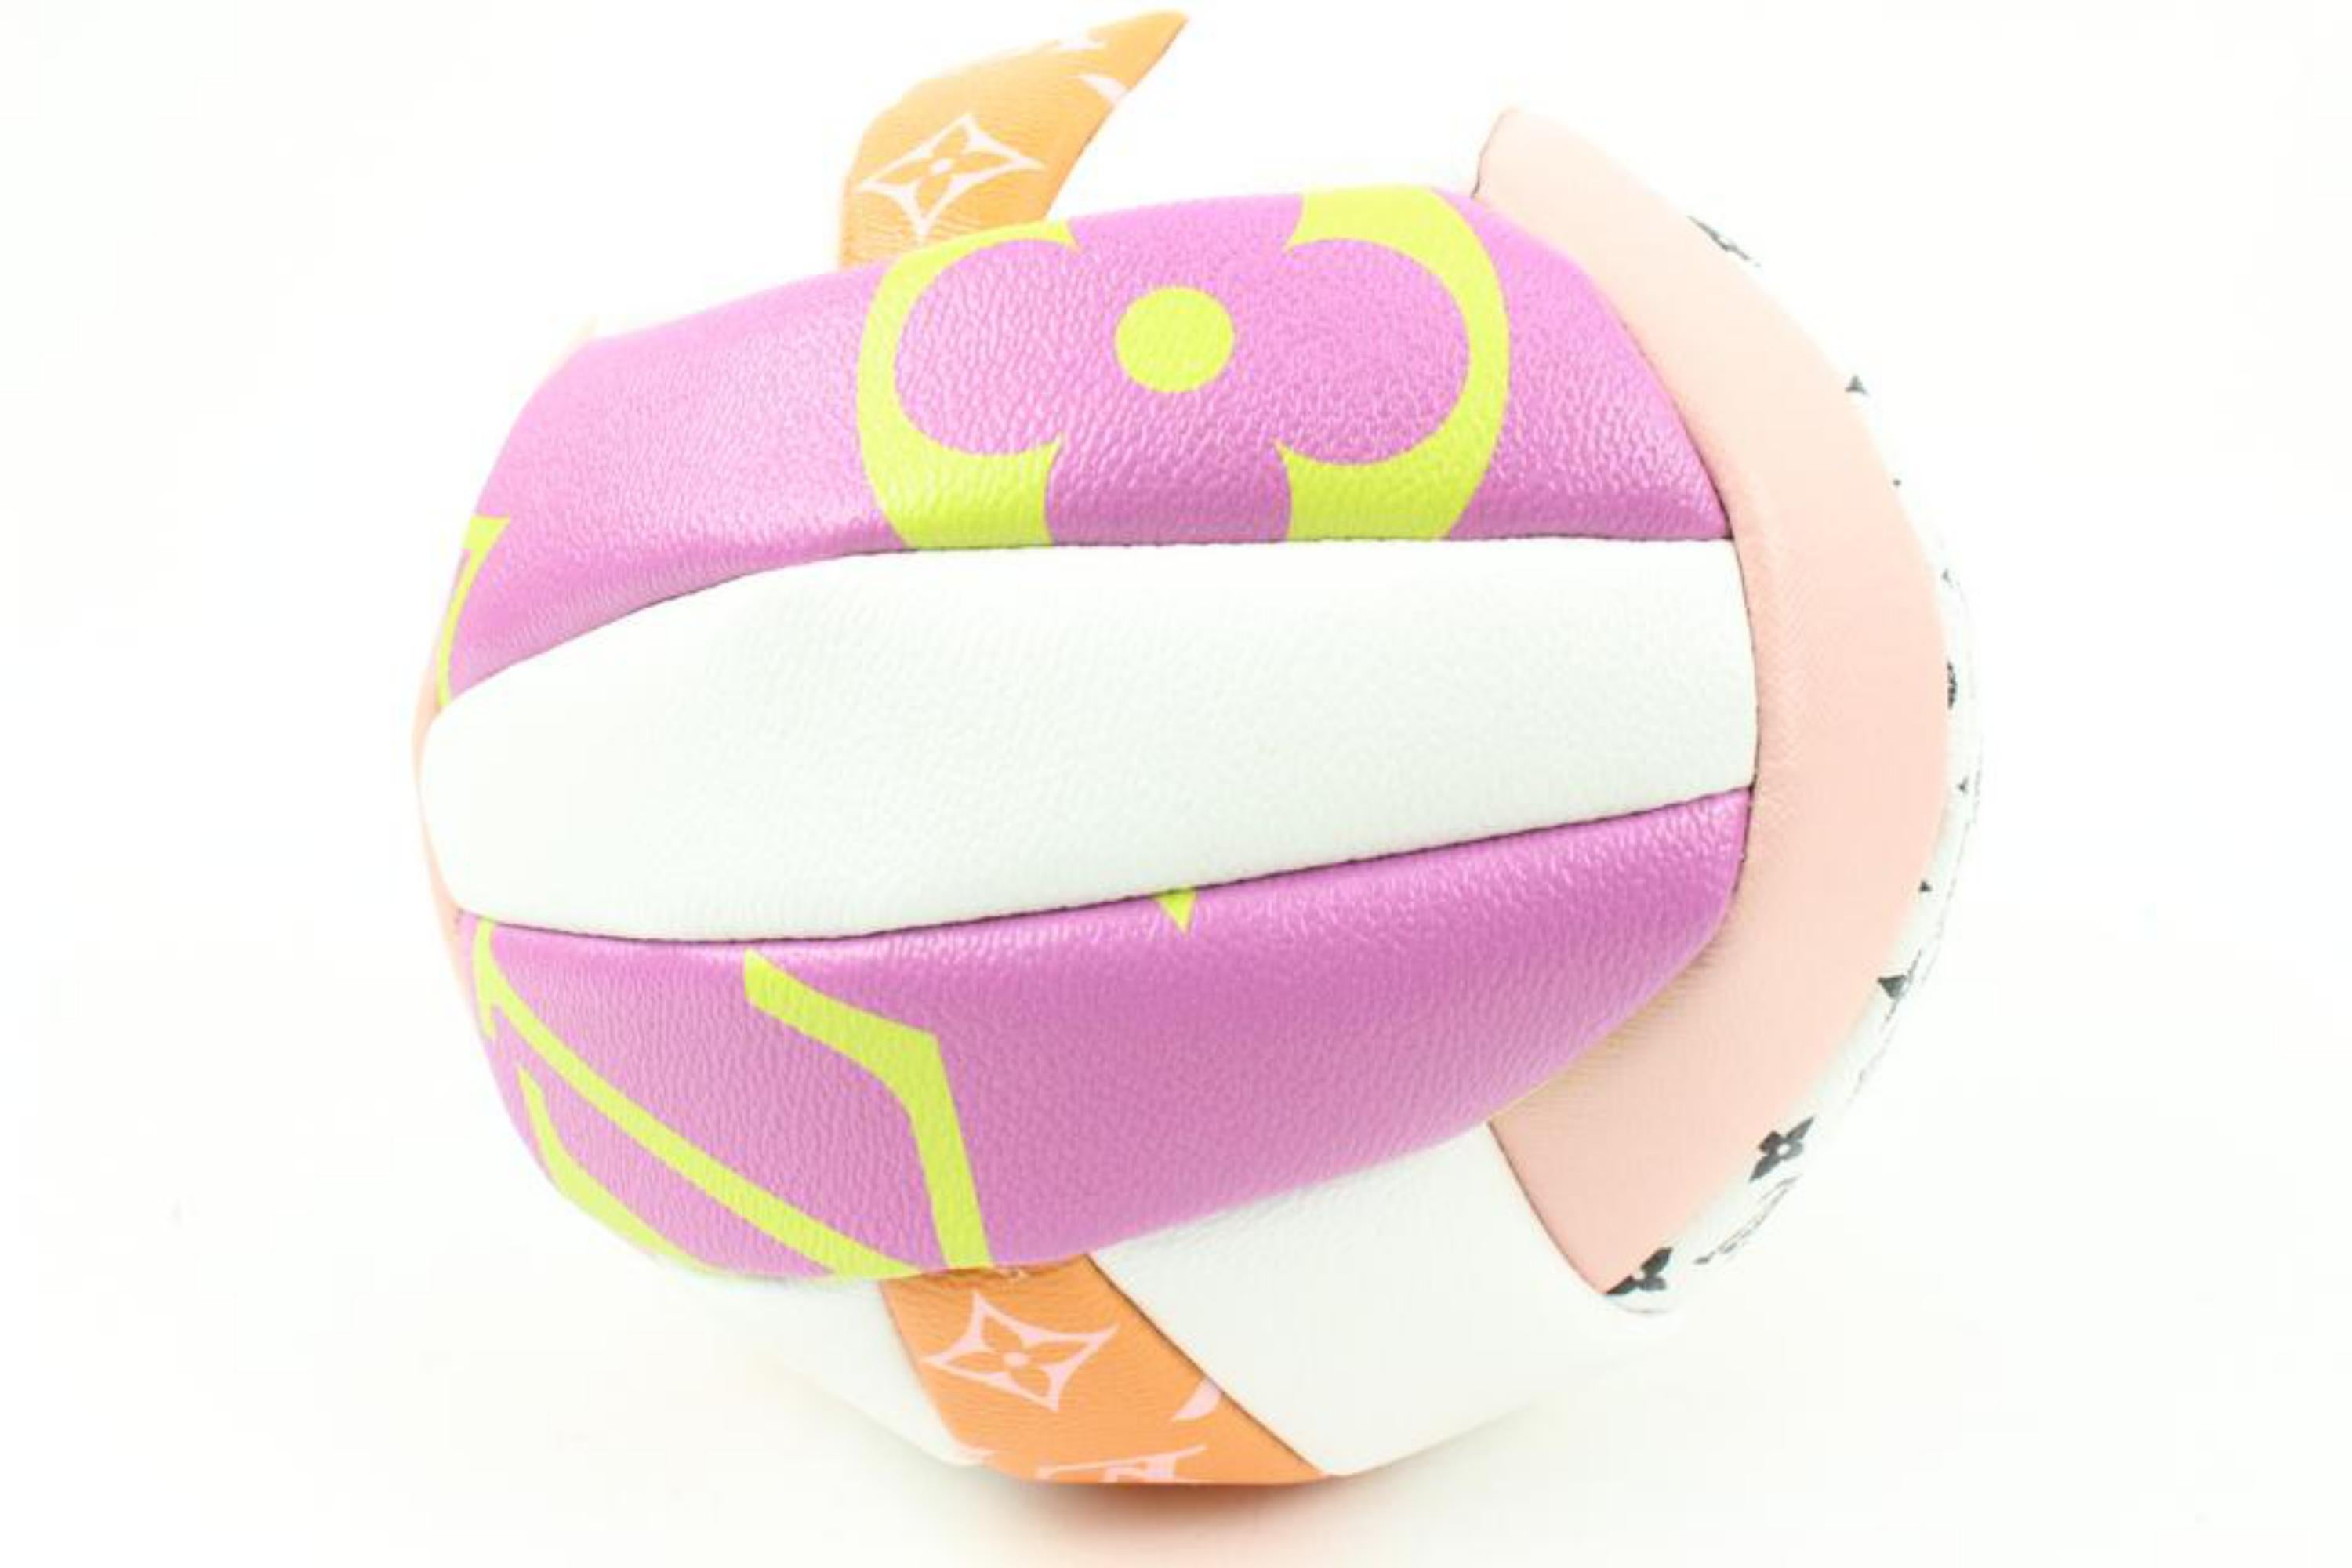 Louis Vuitton SS20 Limited Pink x Orange Monogram Giant Volleyball 121lv43 For Sale 3